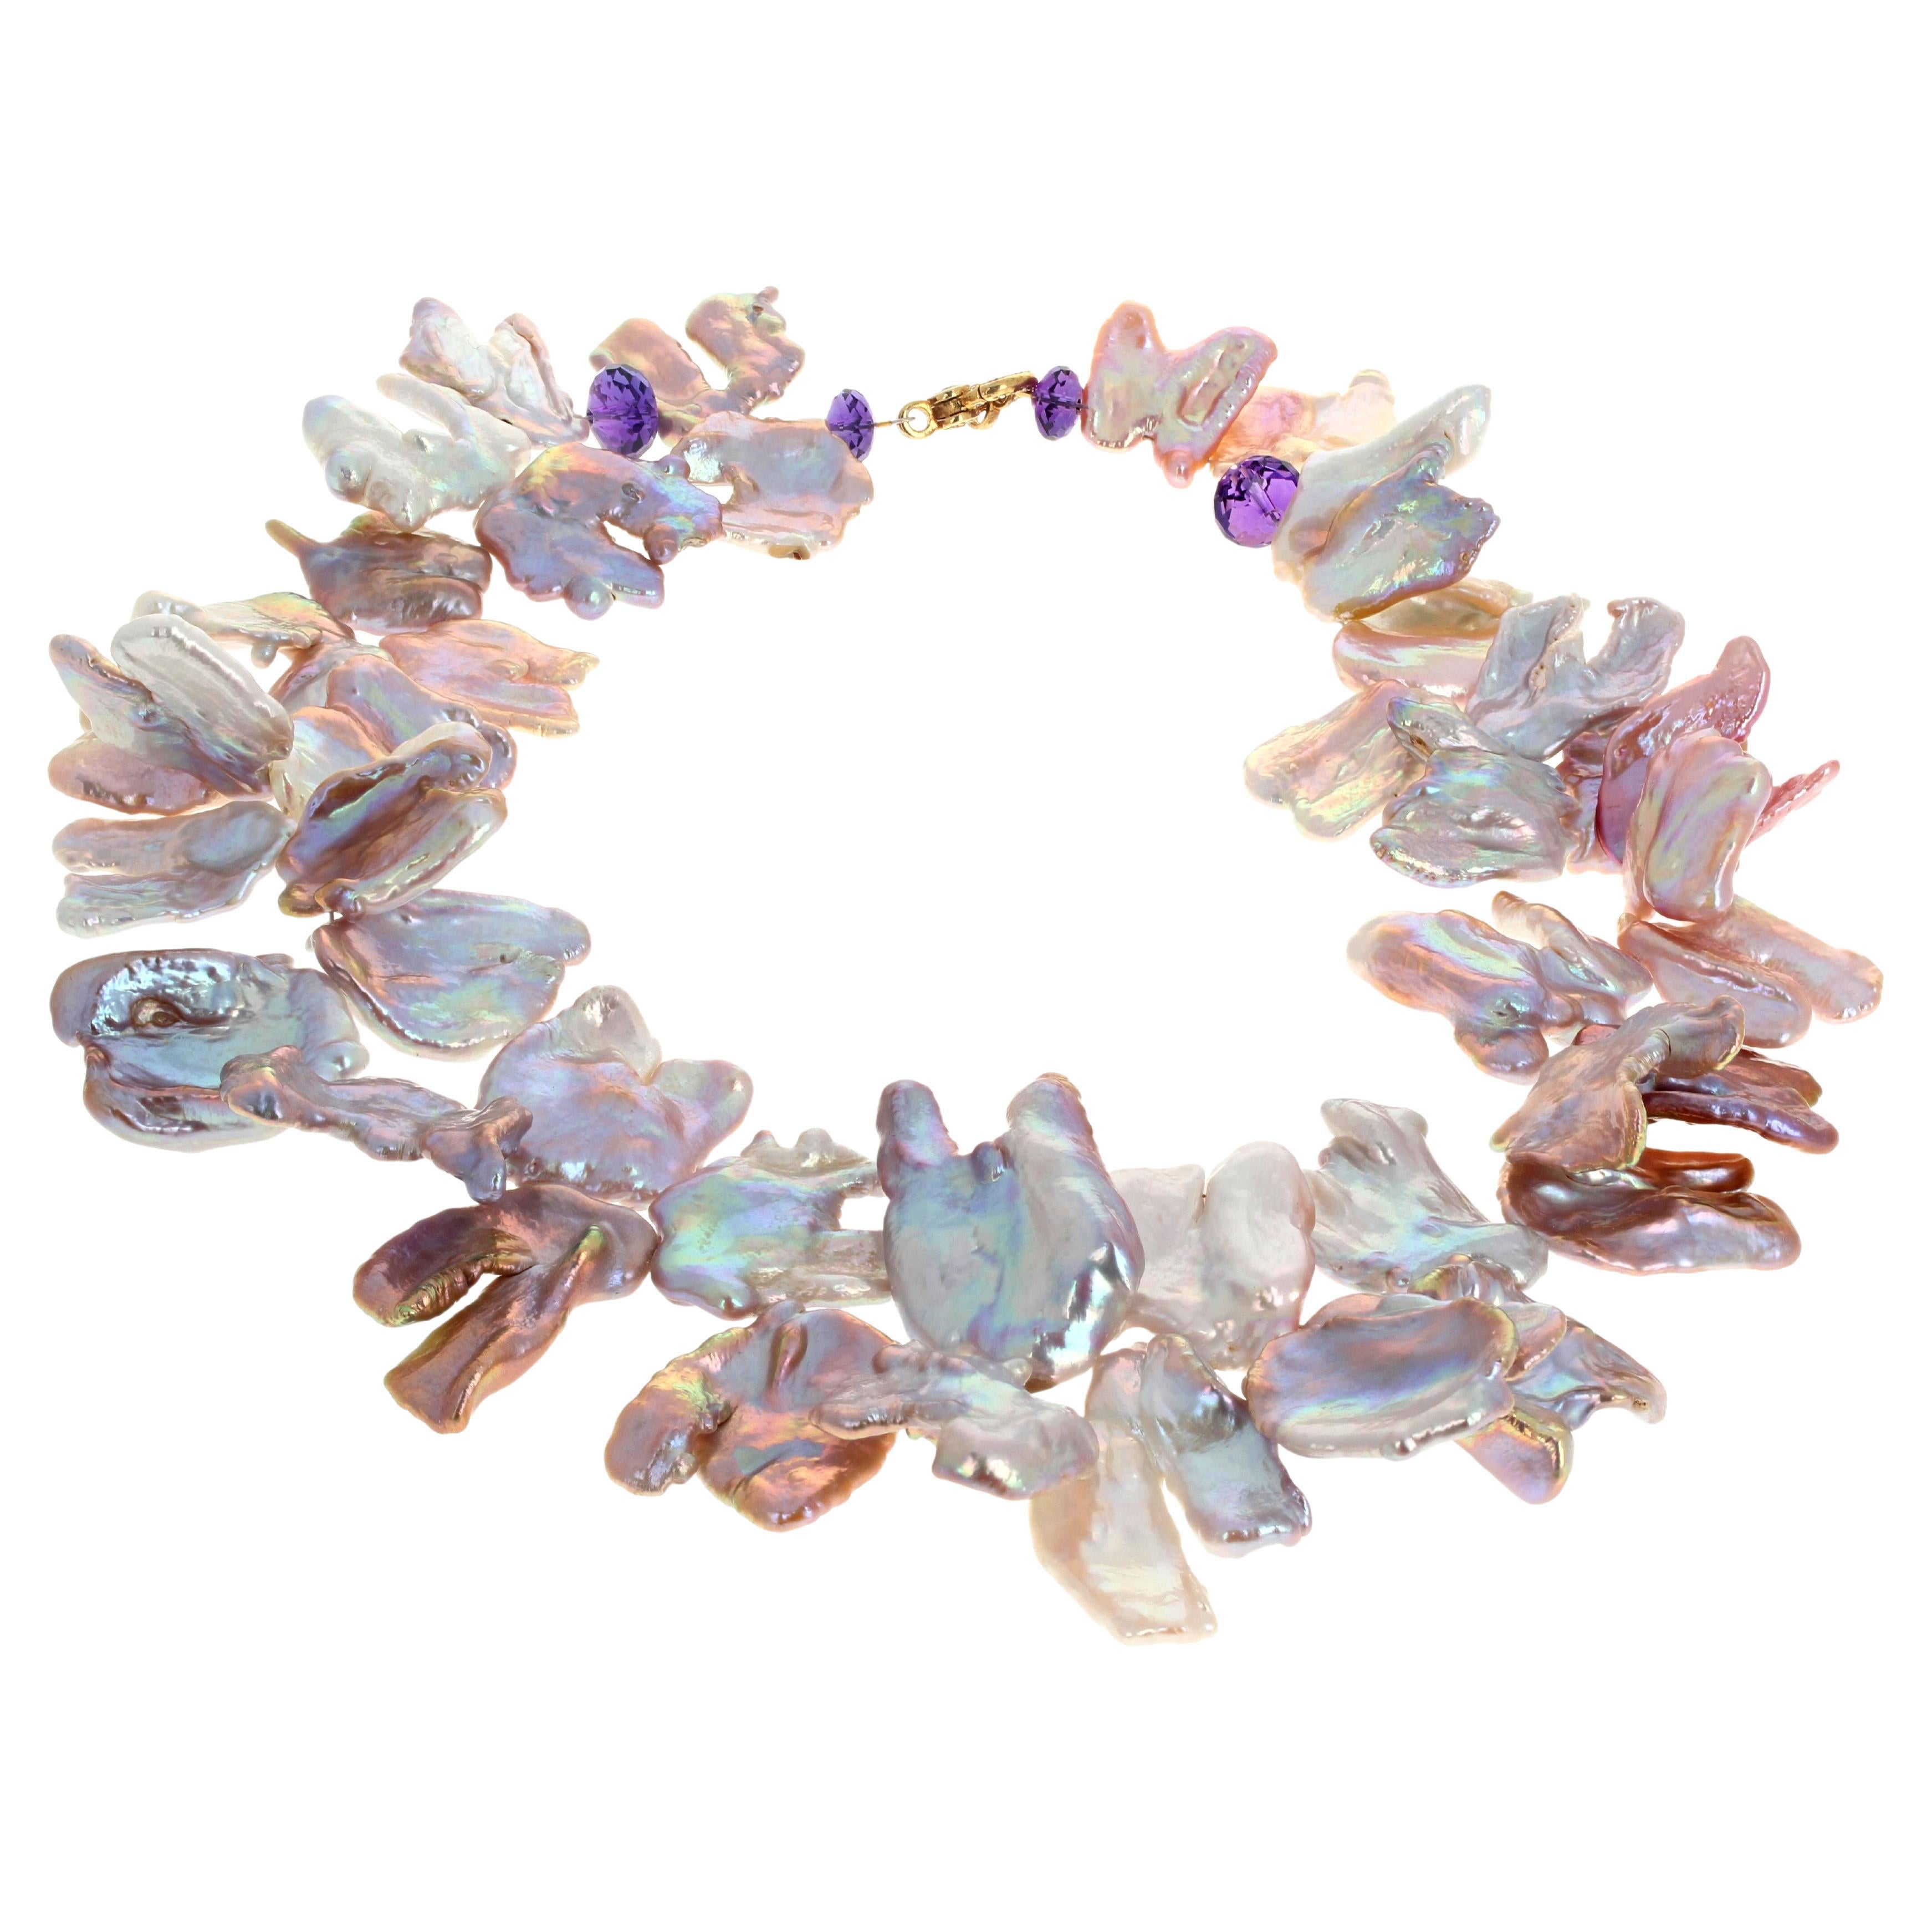 Huge Flipfloppy beautiful glistening natural real Oyster Shell Pearls make up this magnificent 18 1/2 inches long necklace.  The brilliant glittering colors all reflect against each other.  The largest are approximately 26 1/2mm x 22mm and the